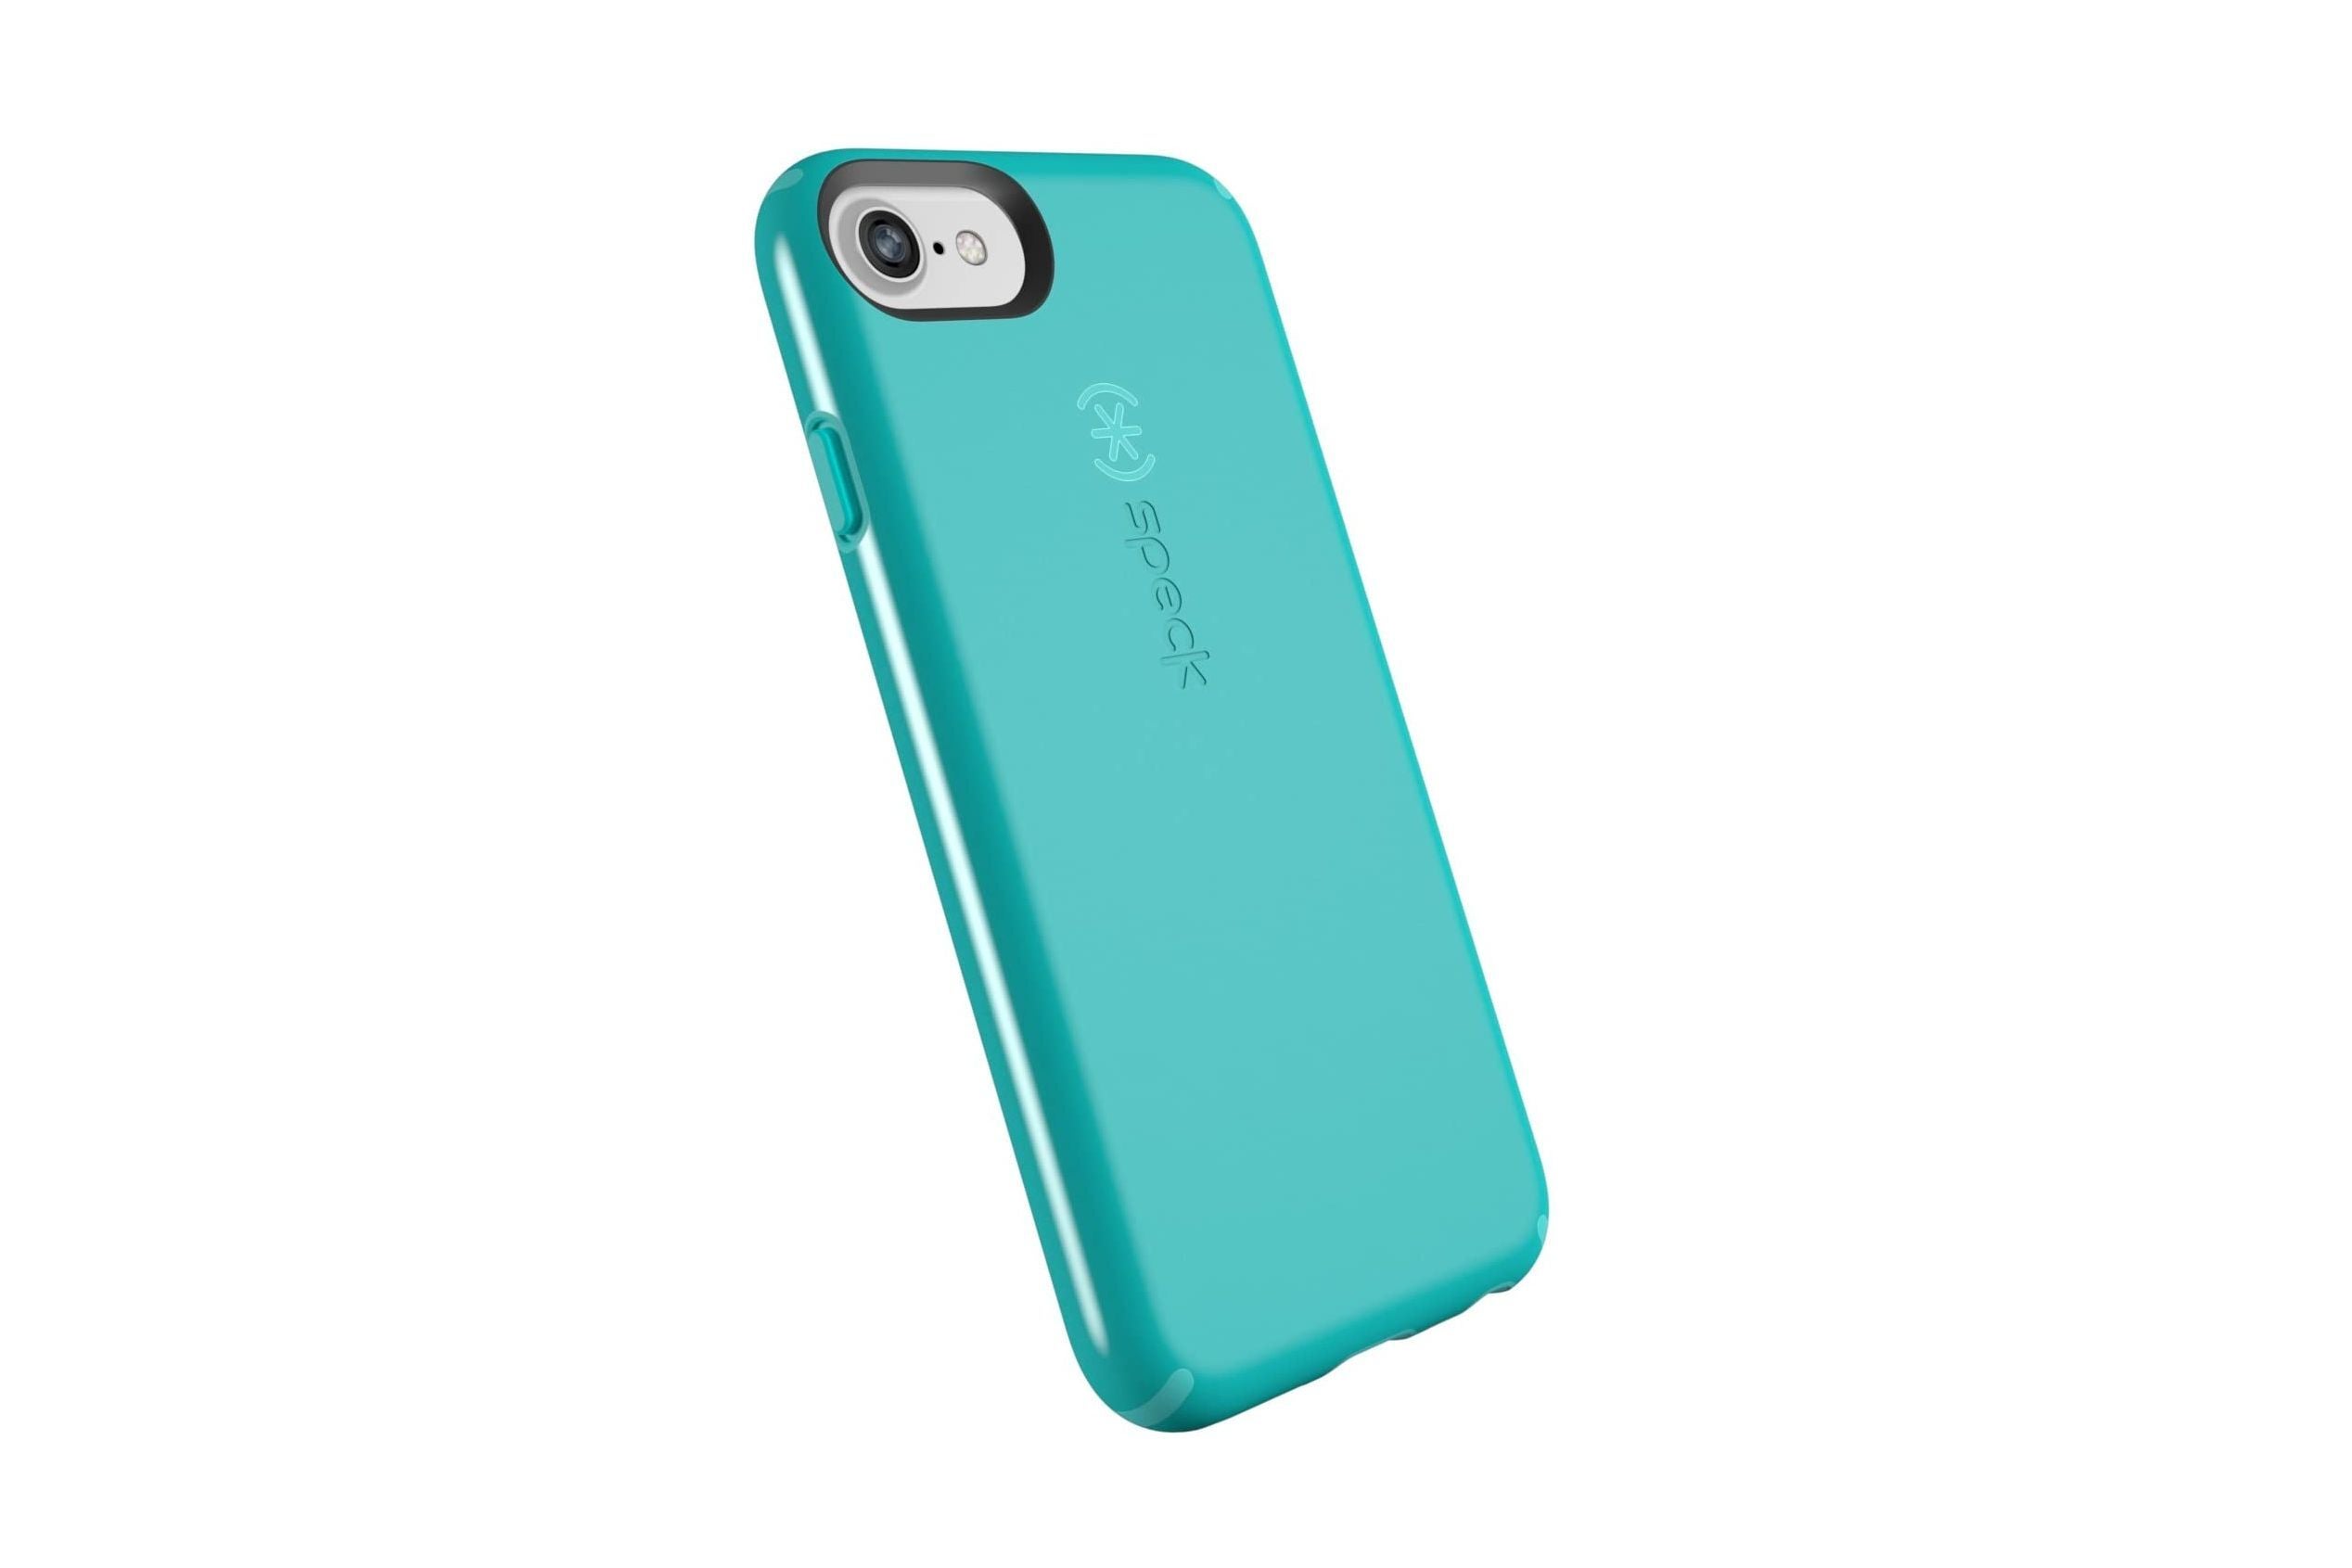 Best heavy duty iPhone SE cases - updated 2021